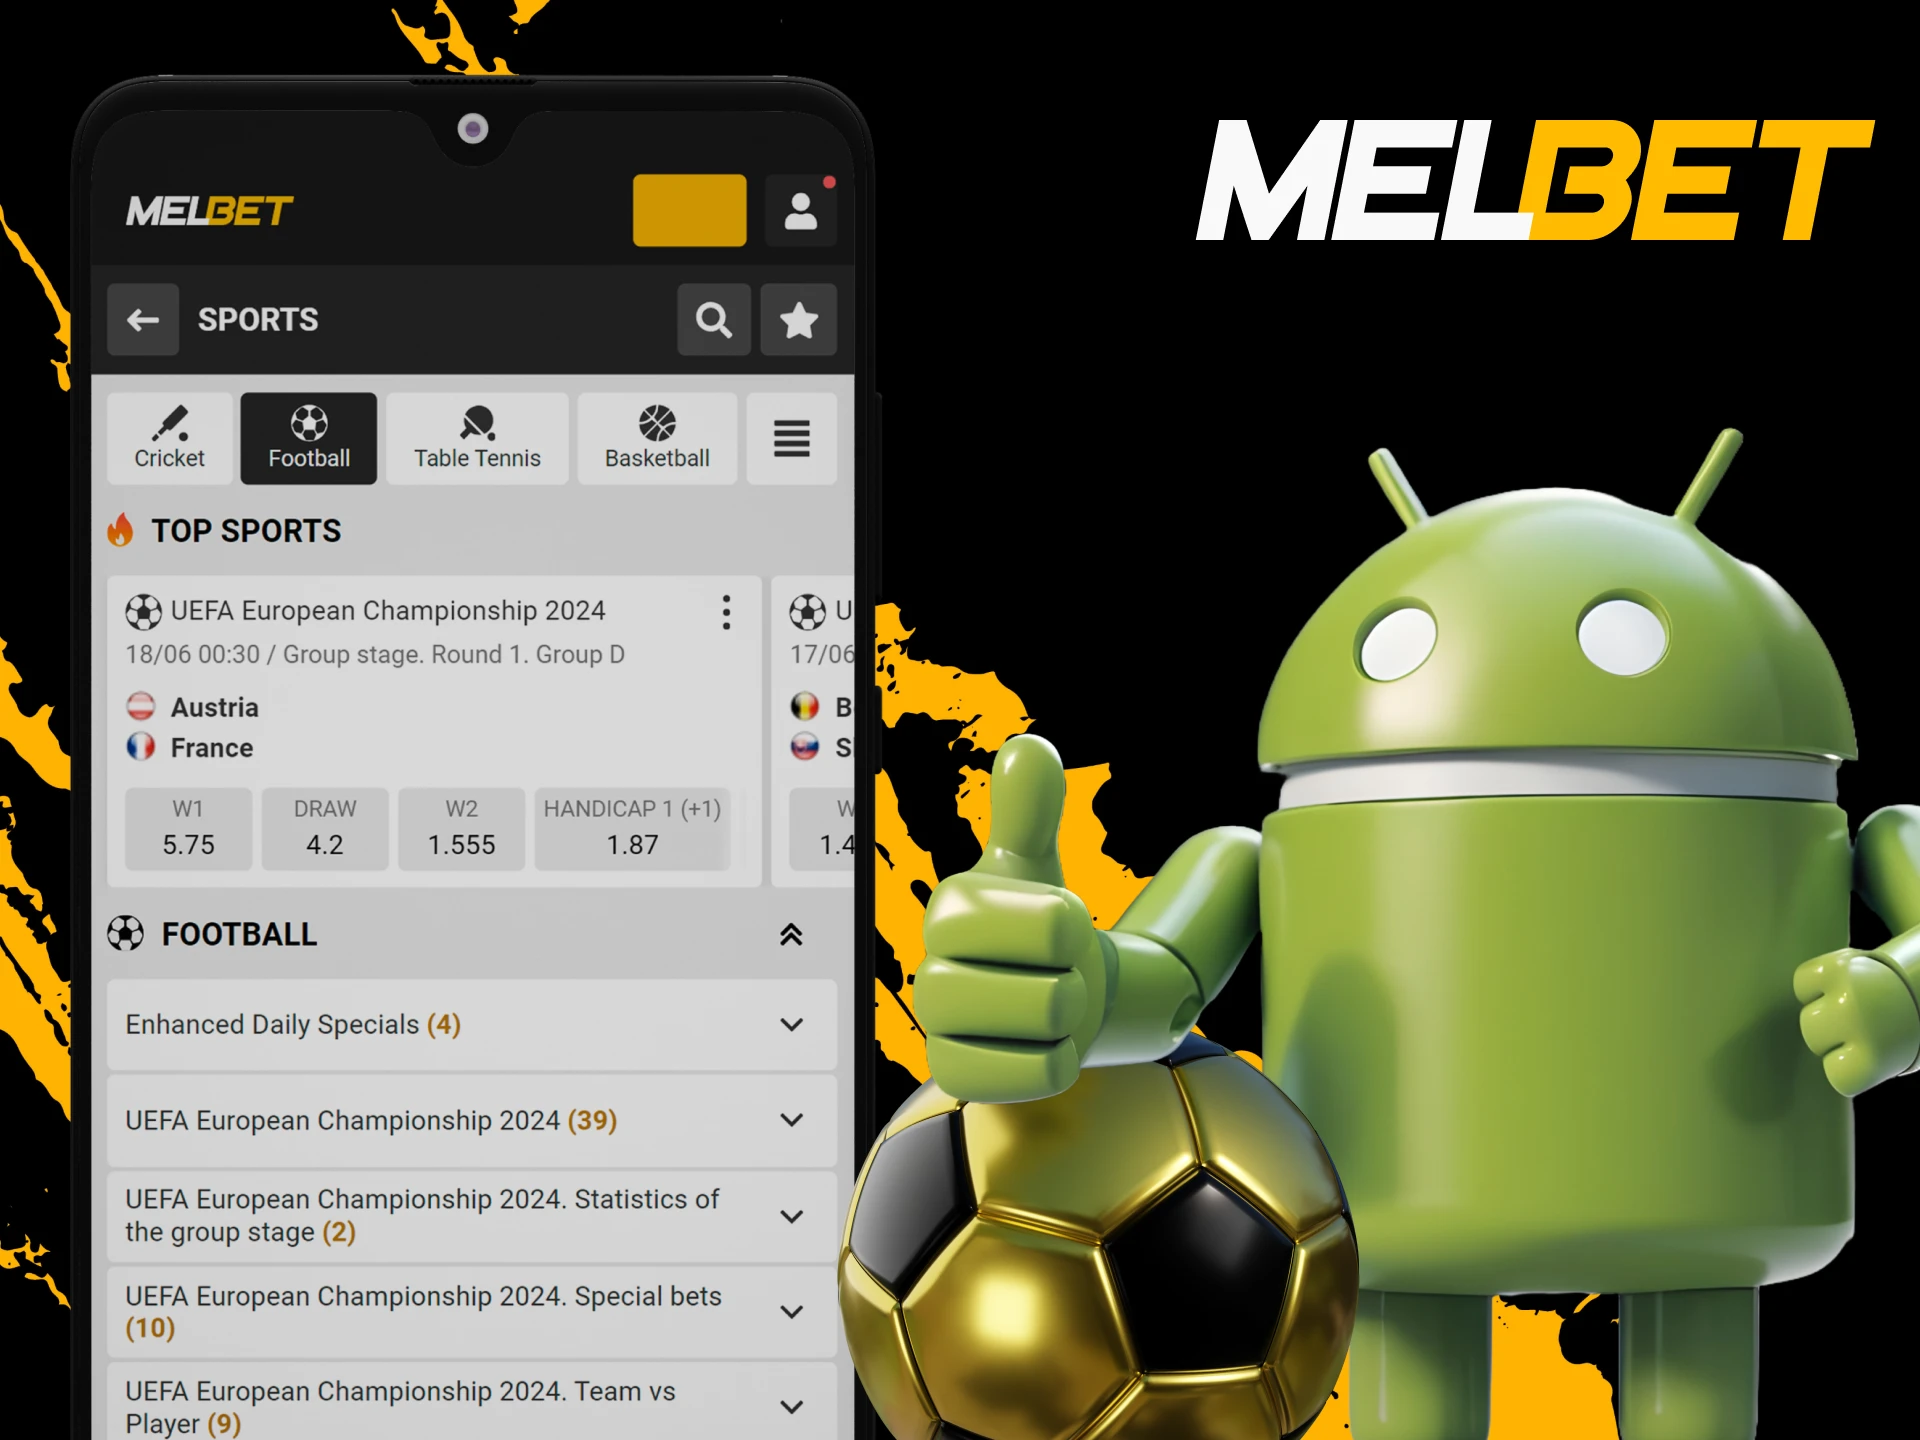 Find out how to bet on football using the Melbet mobile app for Android.